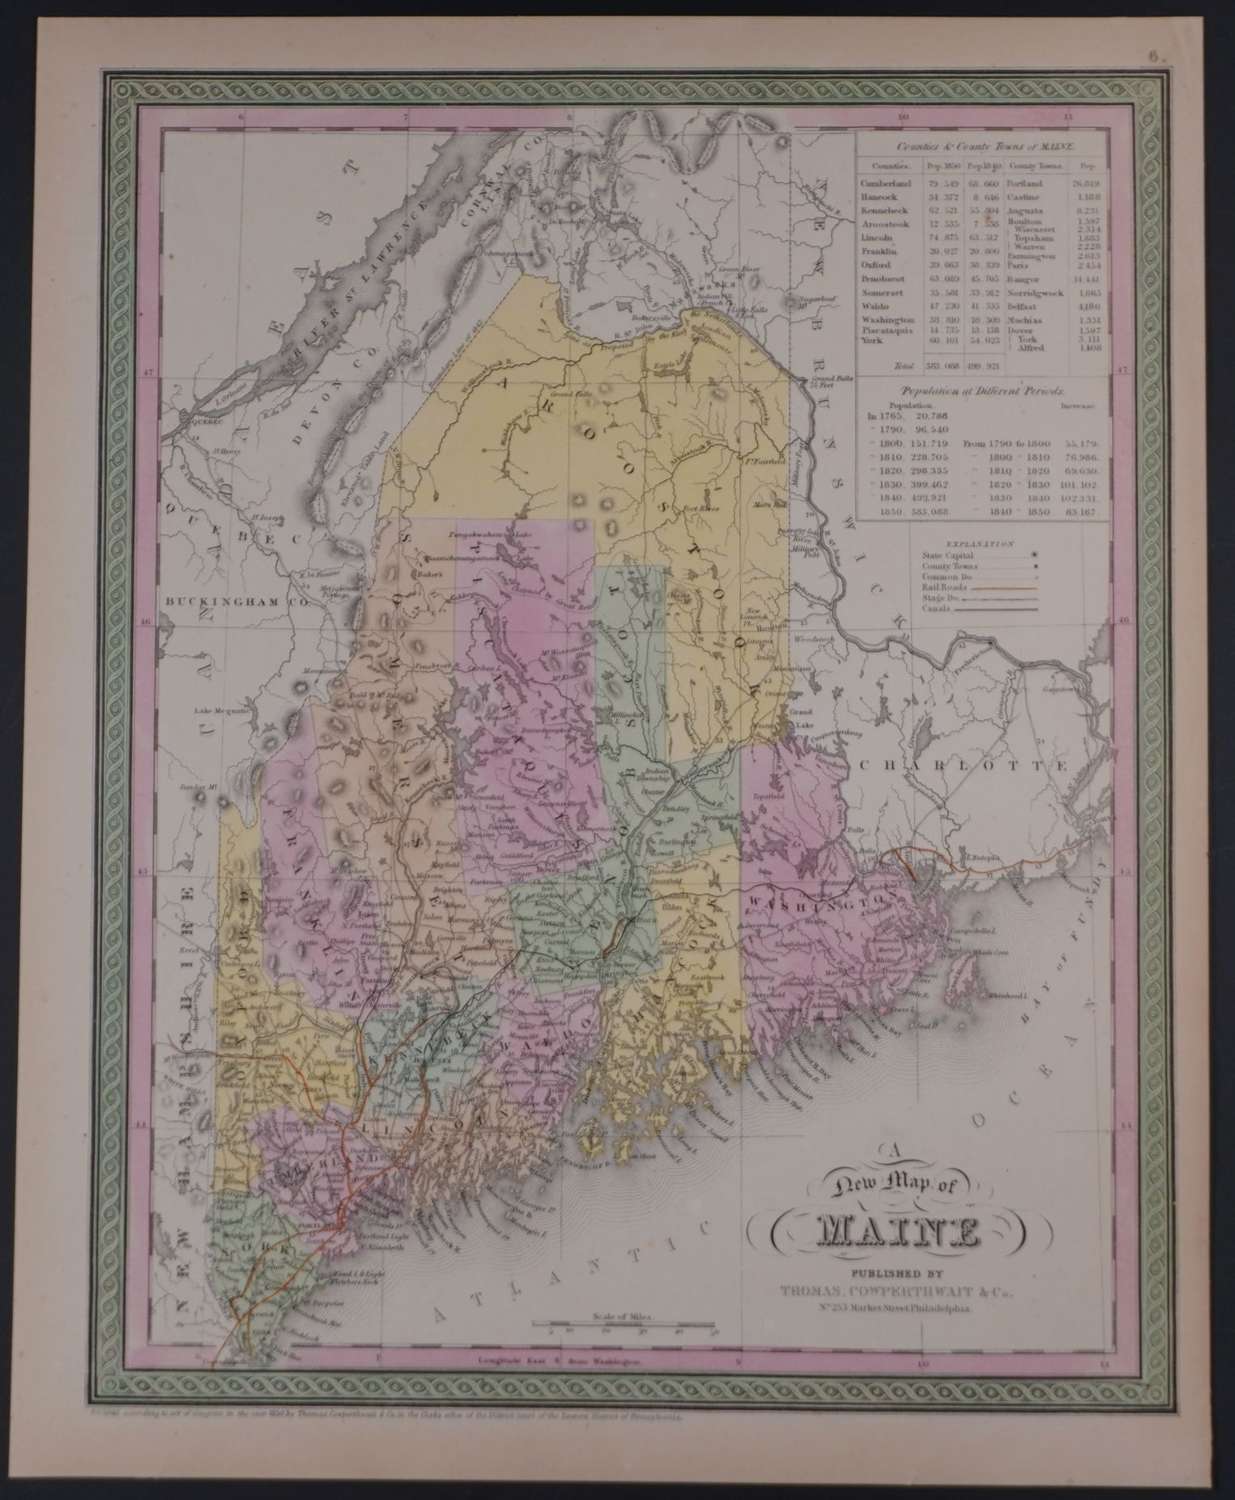 A New Map of Maine by Thomas Cowperthwait & Co